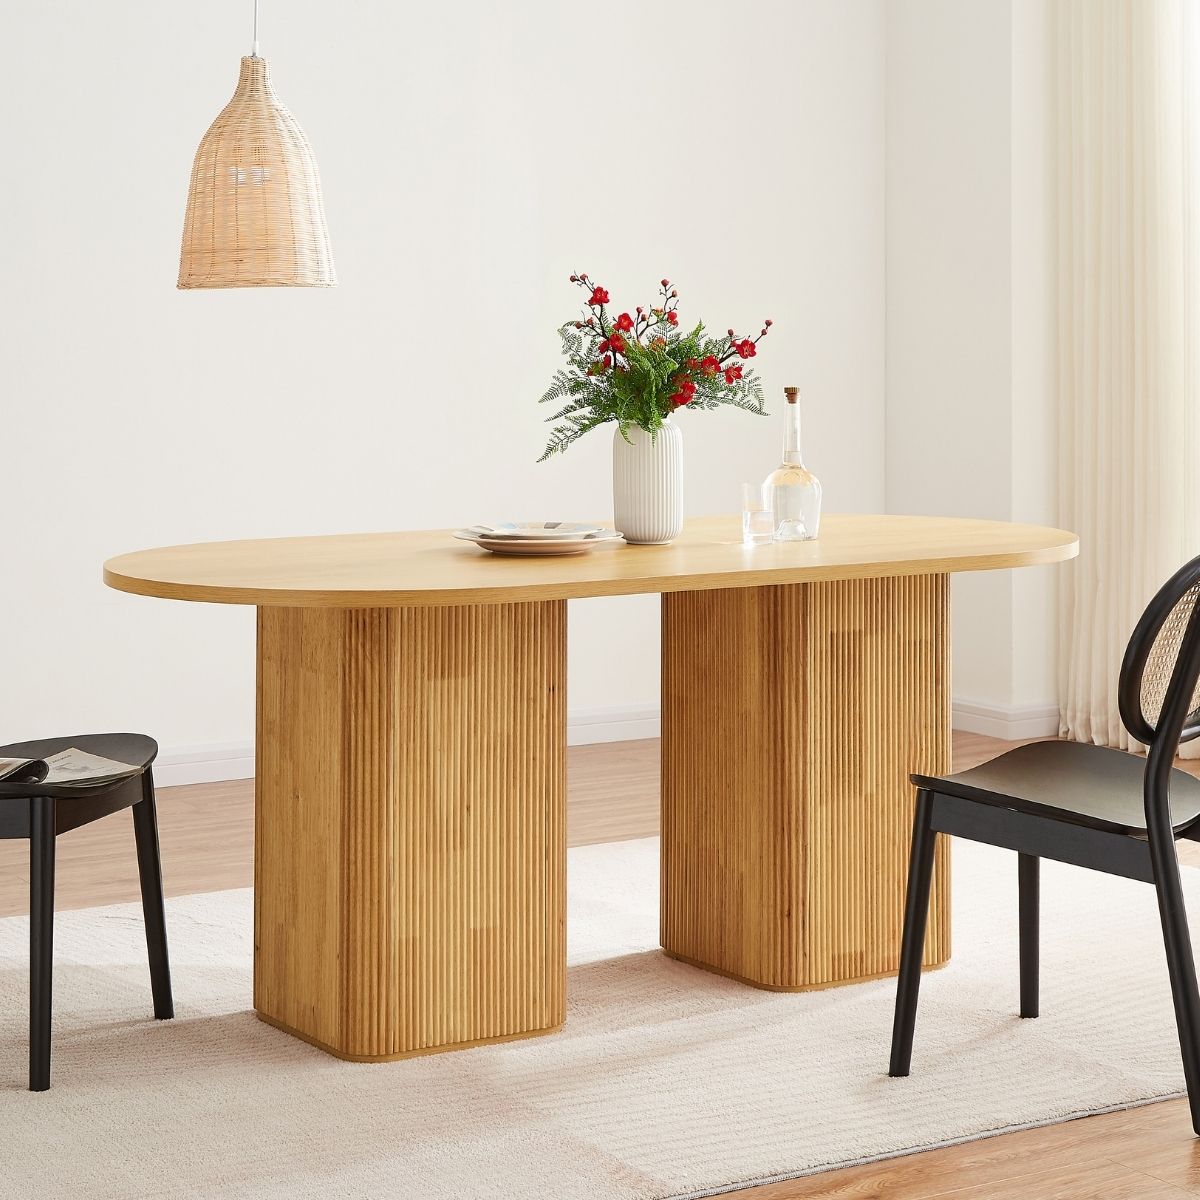 Ember 6 Seater Column Dining Table in Natural